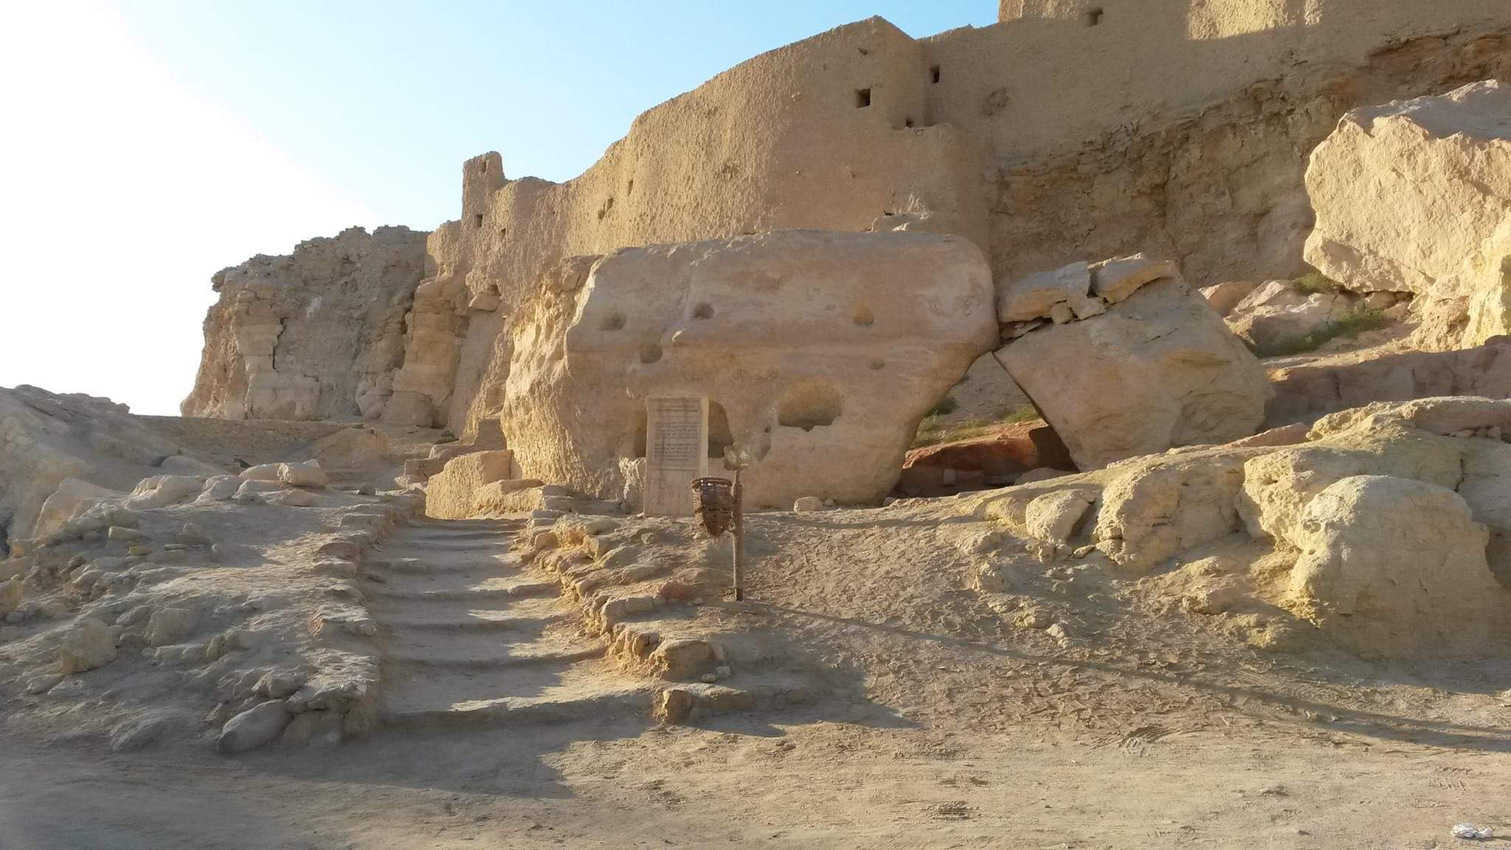 Steps leading to the Temple of the Oracle in Siwa.